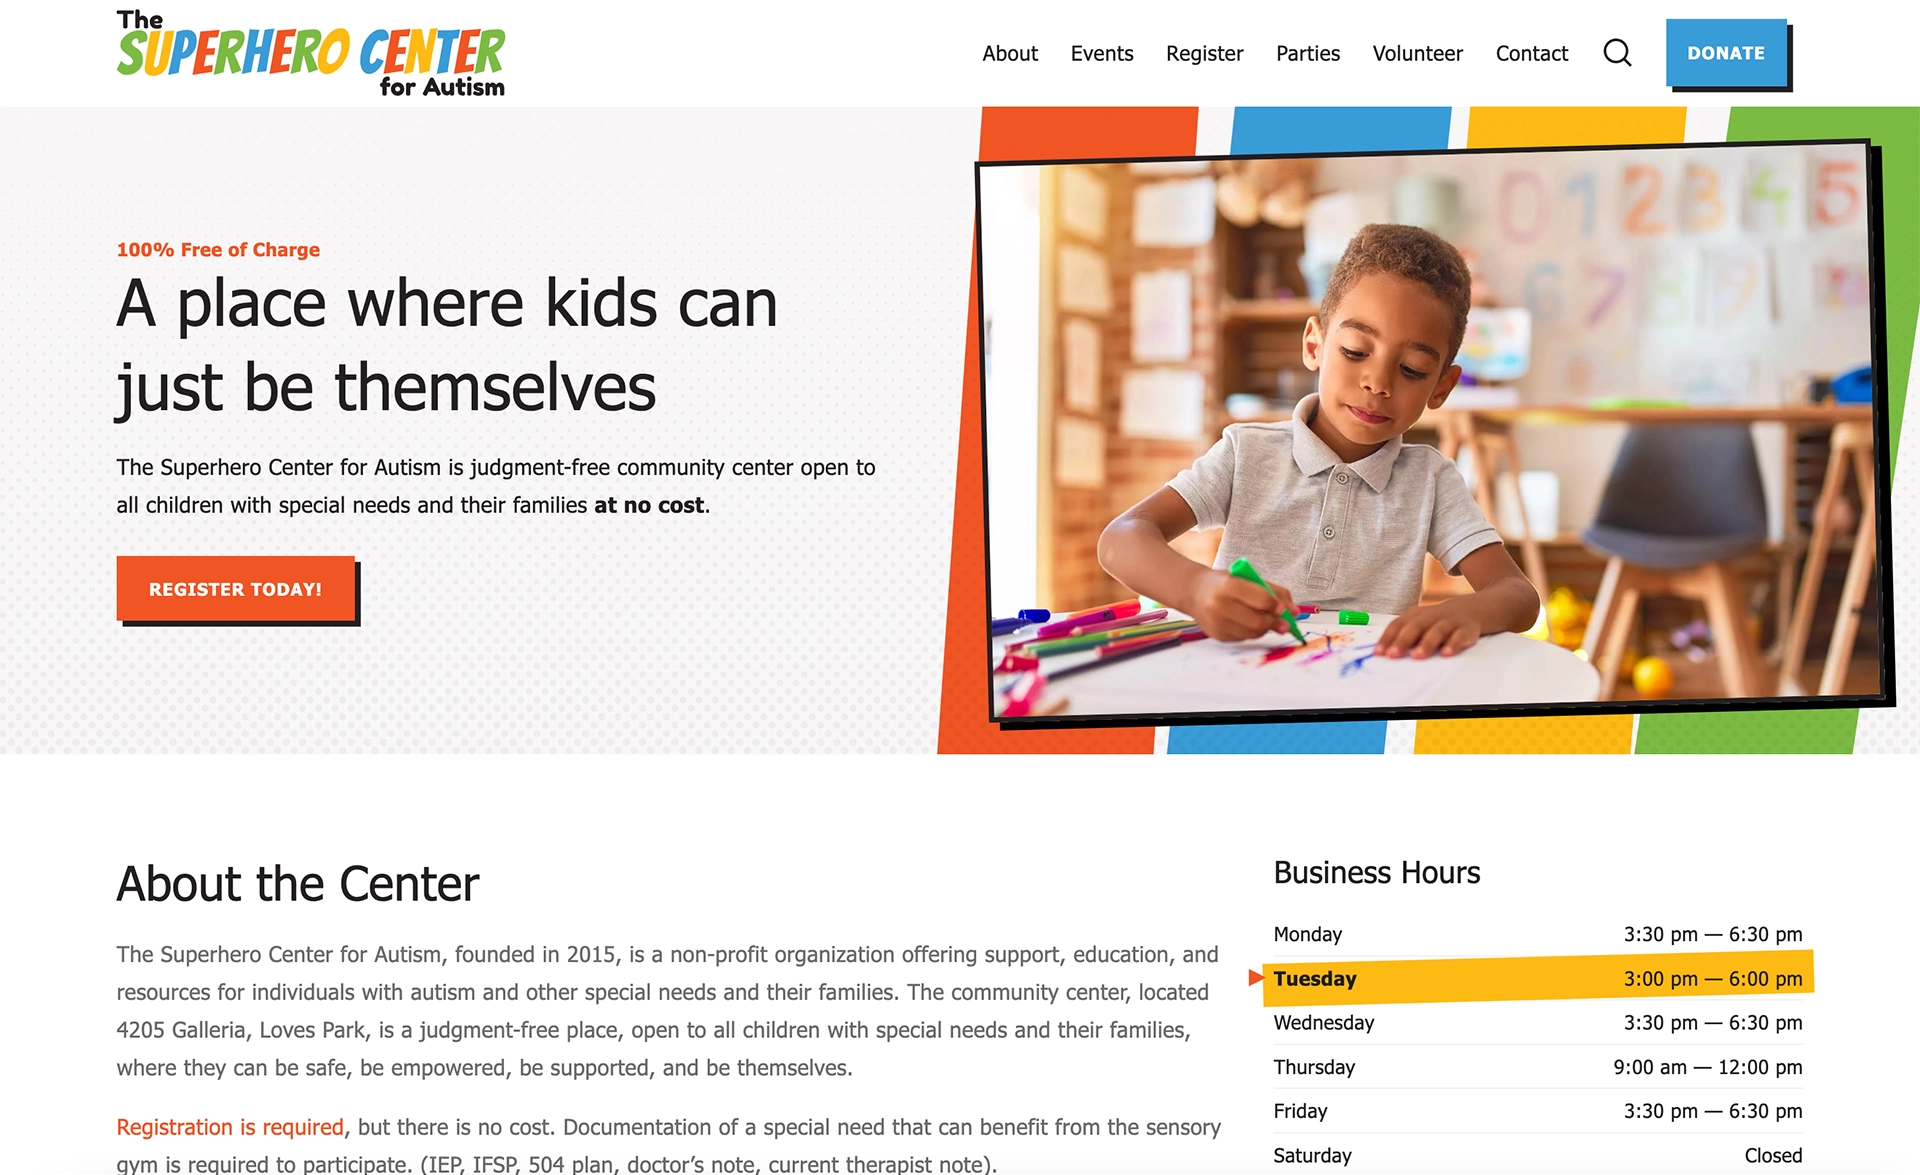 The new website of the Superhero Center for Autism